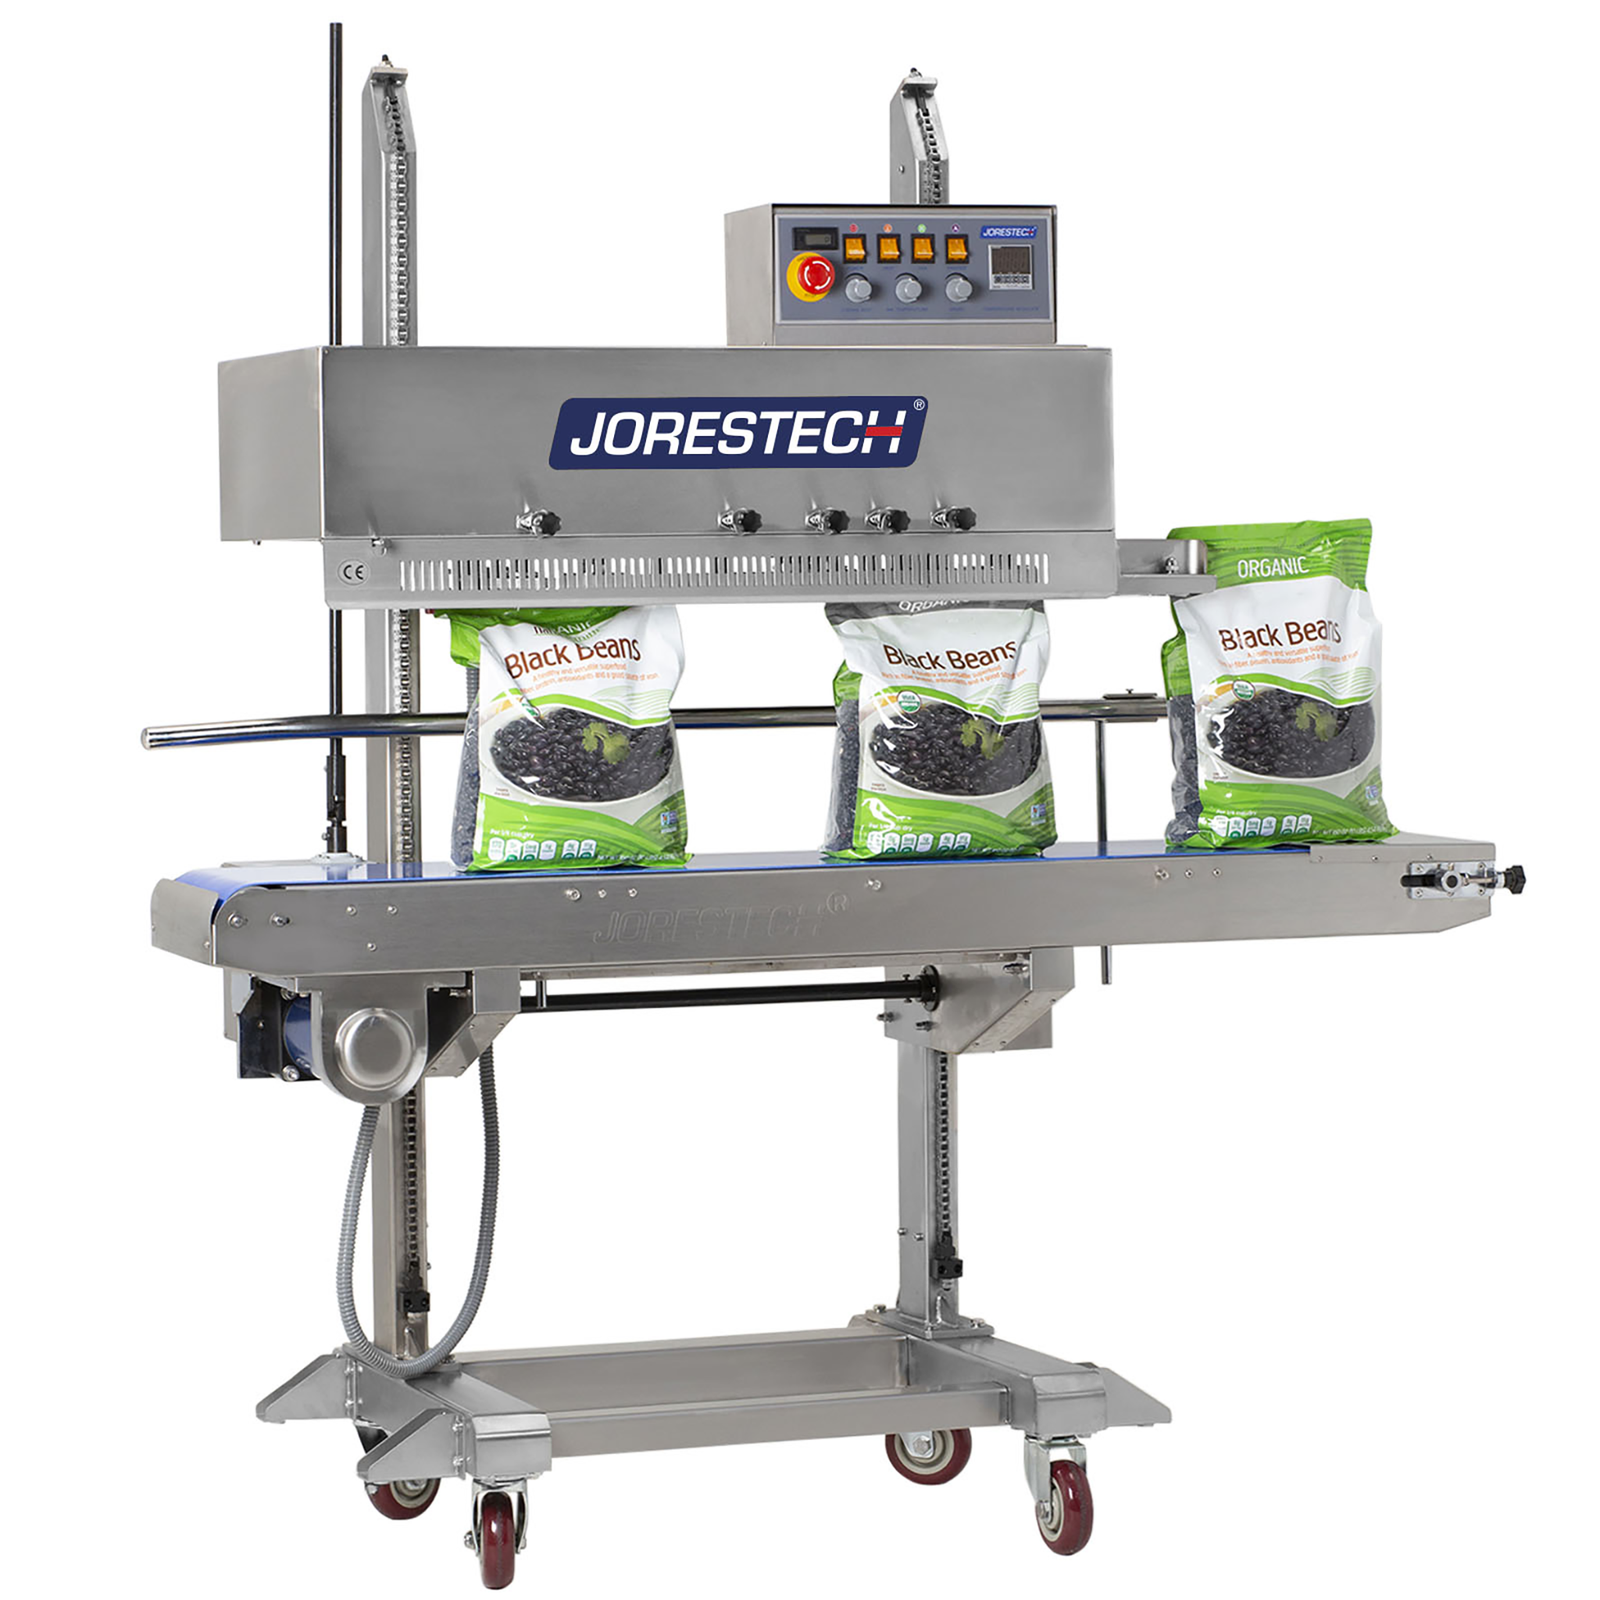 Front view of the stainless steel JORESTECH vertical continuous band sealer with coder and blue JORESTECH logo and emergency red stop button sealing a production of large plastic bags filled with black beans